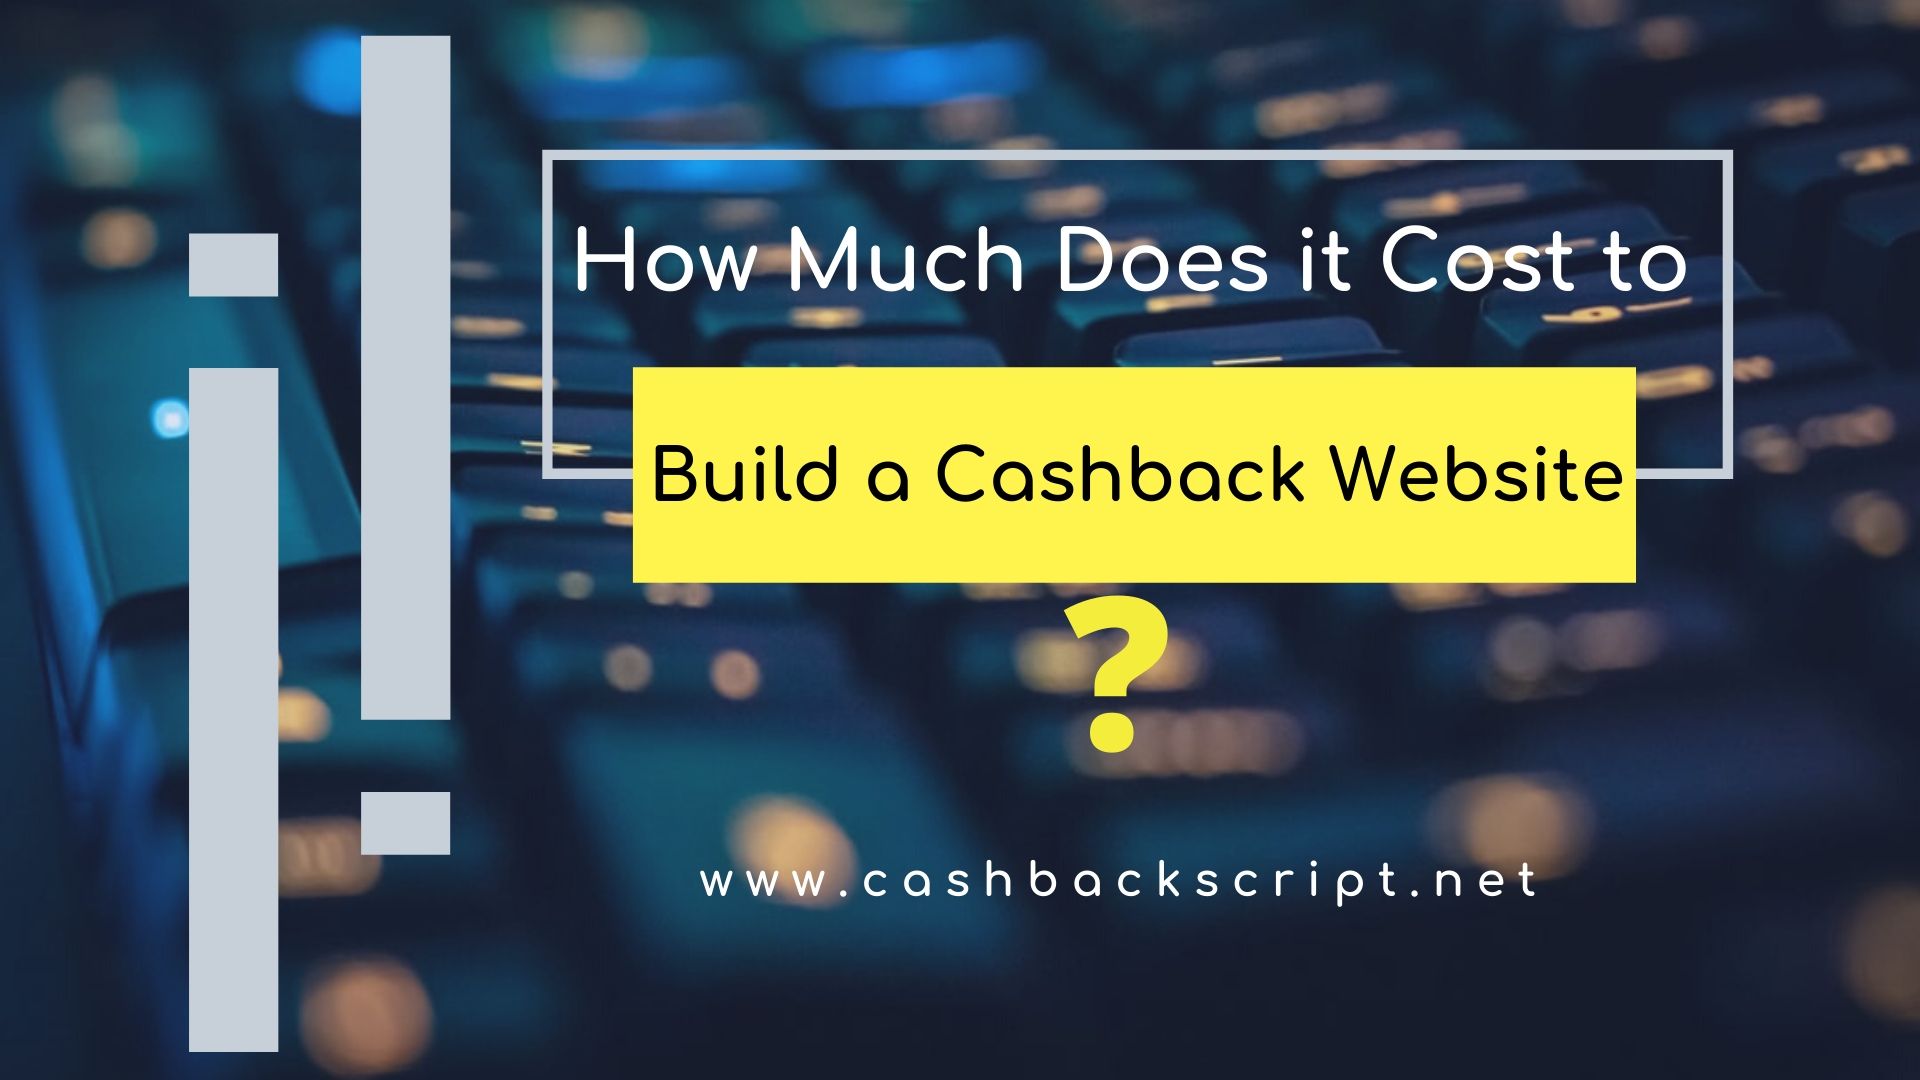 How Much Does it Cost to Build a Cashback Website?